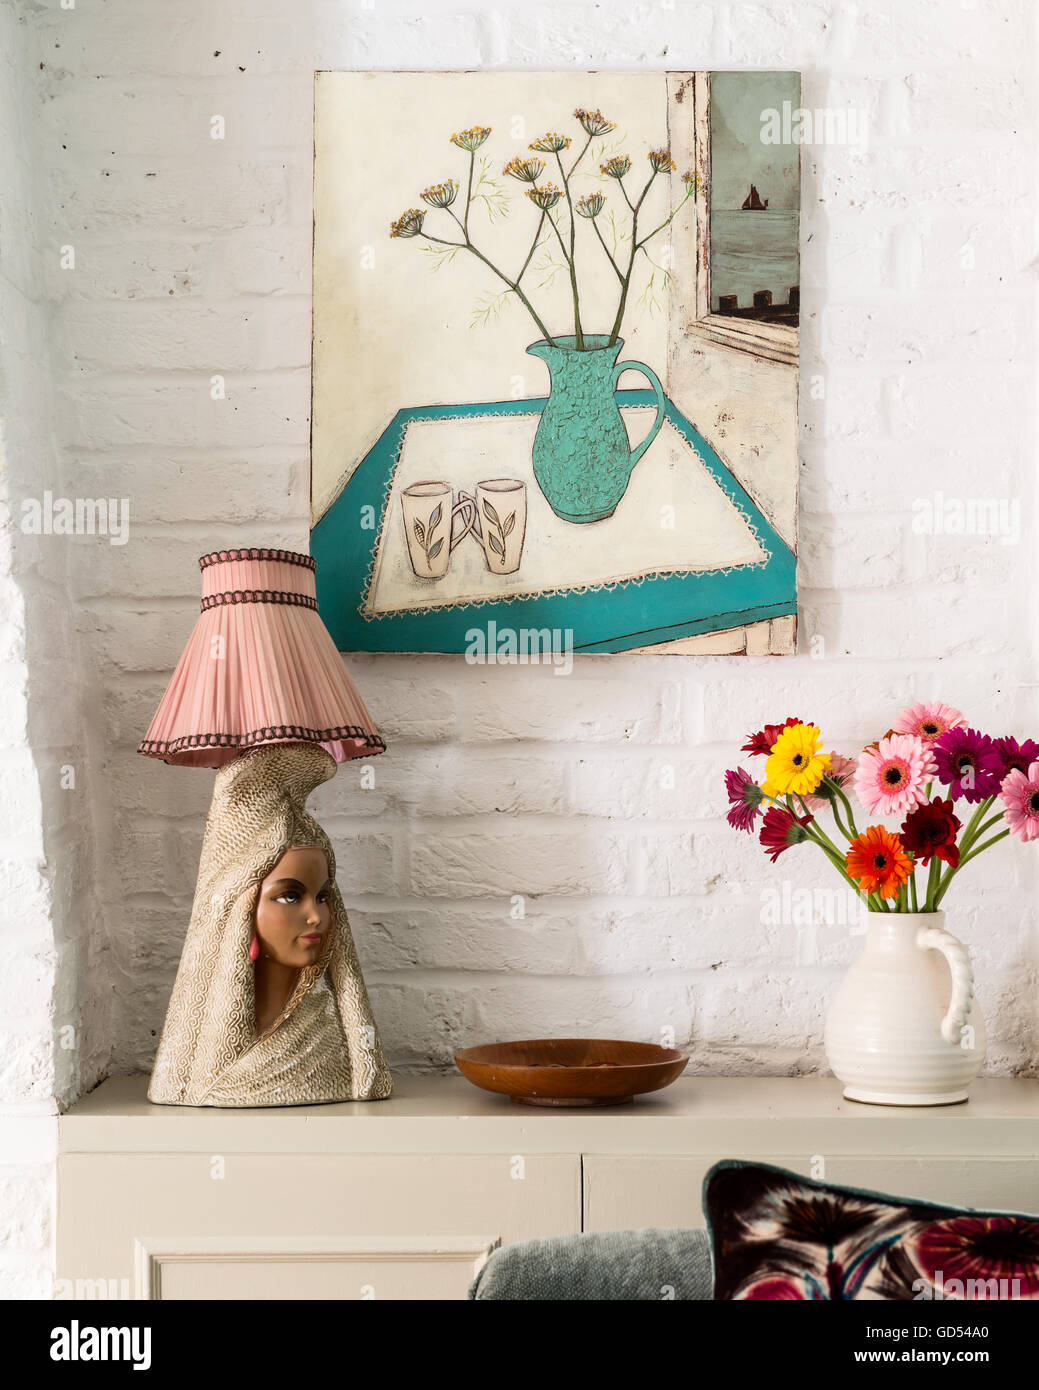 Retro lamp stand on surface with vase of flowers Stock Photo